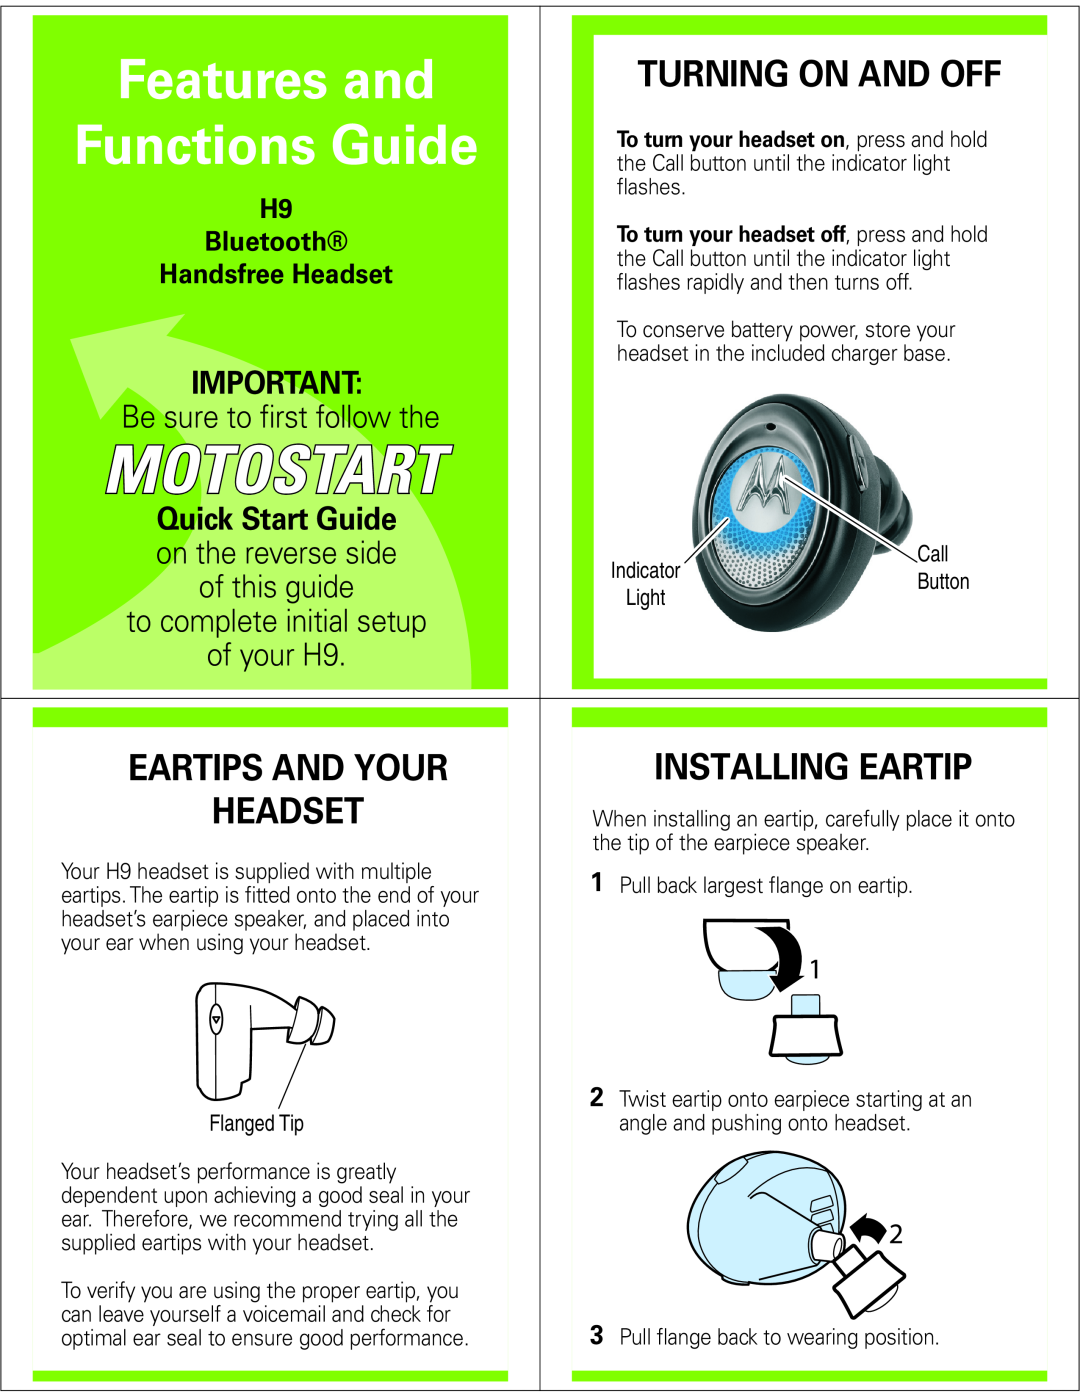 Motorola H9 Eartips And Your, Installing Eartip, Handsfree Headset, Features and, Functions Guide, Turning On And Off 